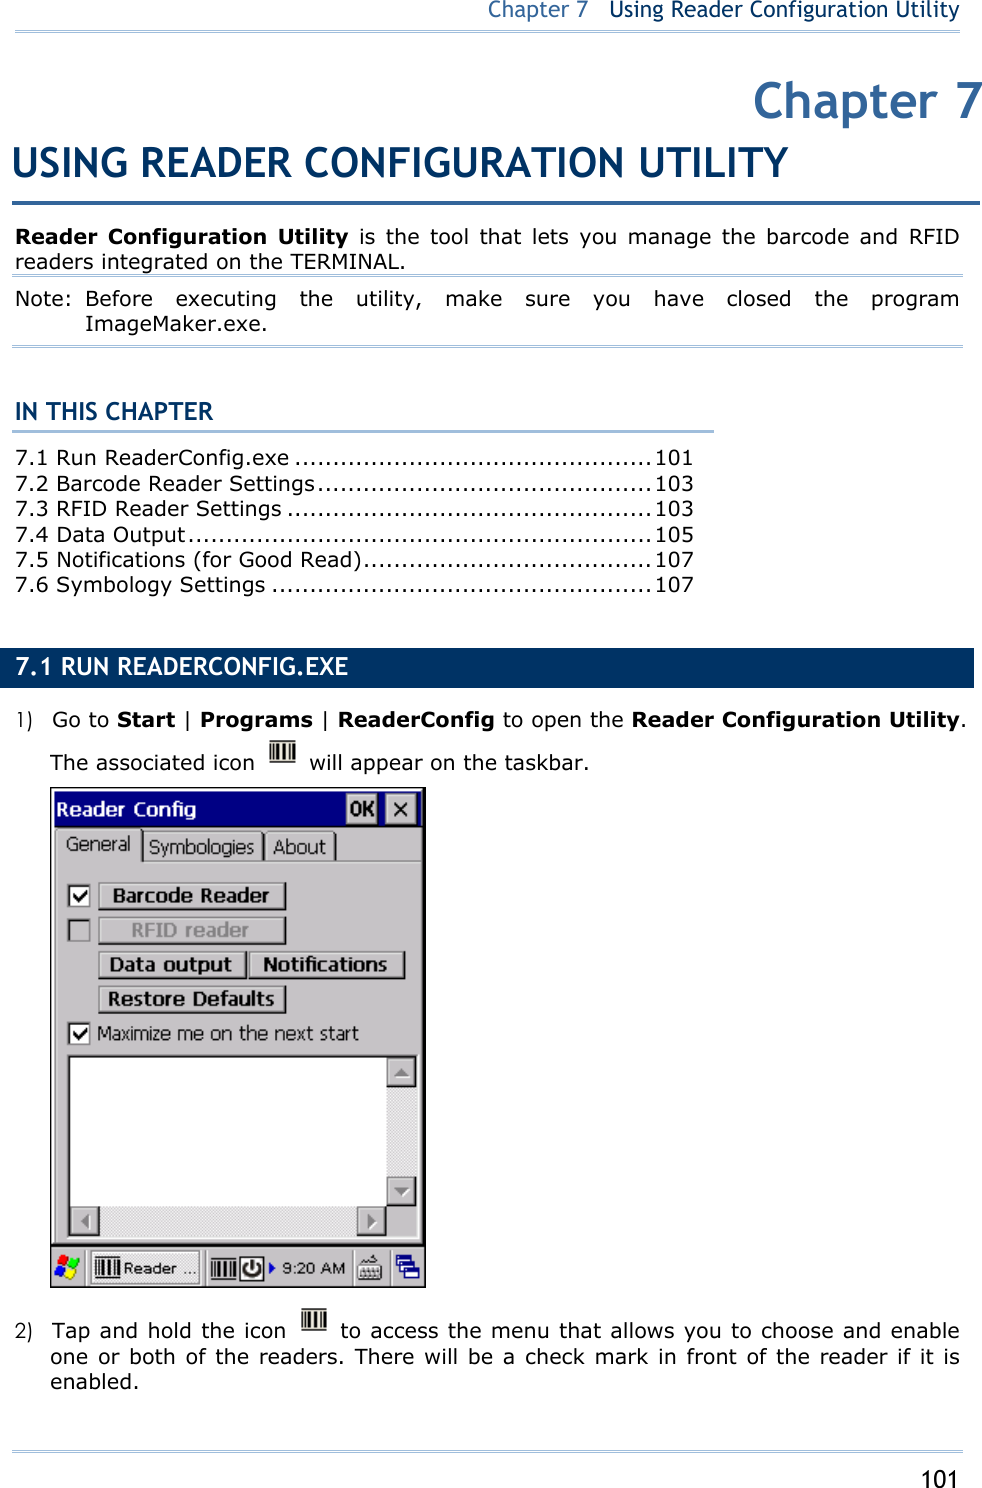     101   Chapter 7   Using Reader Configuration Utility Reader Configuration Utility is the tool that lets you manage the barcode and RFID readers integrated on the TERMINAL.   Note: Before executing the utility, make sure you have closed the program ImageMaker.exe.  IN THIS CHAPTER 7.1 Run ReaderConfig.exe ...............................................101 7.2 Barcode Reader Settings............................................103 7.3 RFID Reader Settings ................................................103 7.4 Data Output.............................................................105 7.5 Notifications (for Good Read)......................................107 7.6 Symbology Settings ..................................................107  7.1 RUN READERCONFIG.EXE   1)  Go to Start | Programs | ReaderConfig to open the Reader Configuration Utility. The associated icon    will appear on the taskbar.    2)  Tap and hold the icon   to access the menu that allows you to choose and enable one or both of the readers. There will be a check mark in front of the reader if it is enabled. Chapter 7USING READER CONFIGURATION UTILITY 